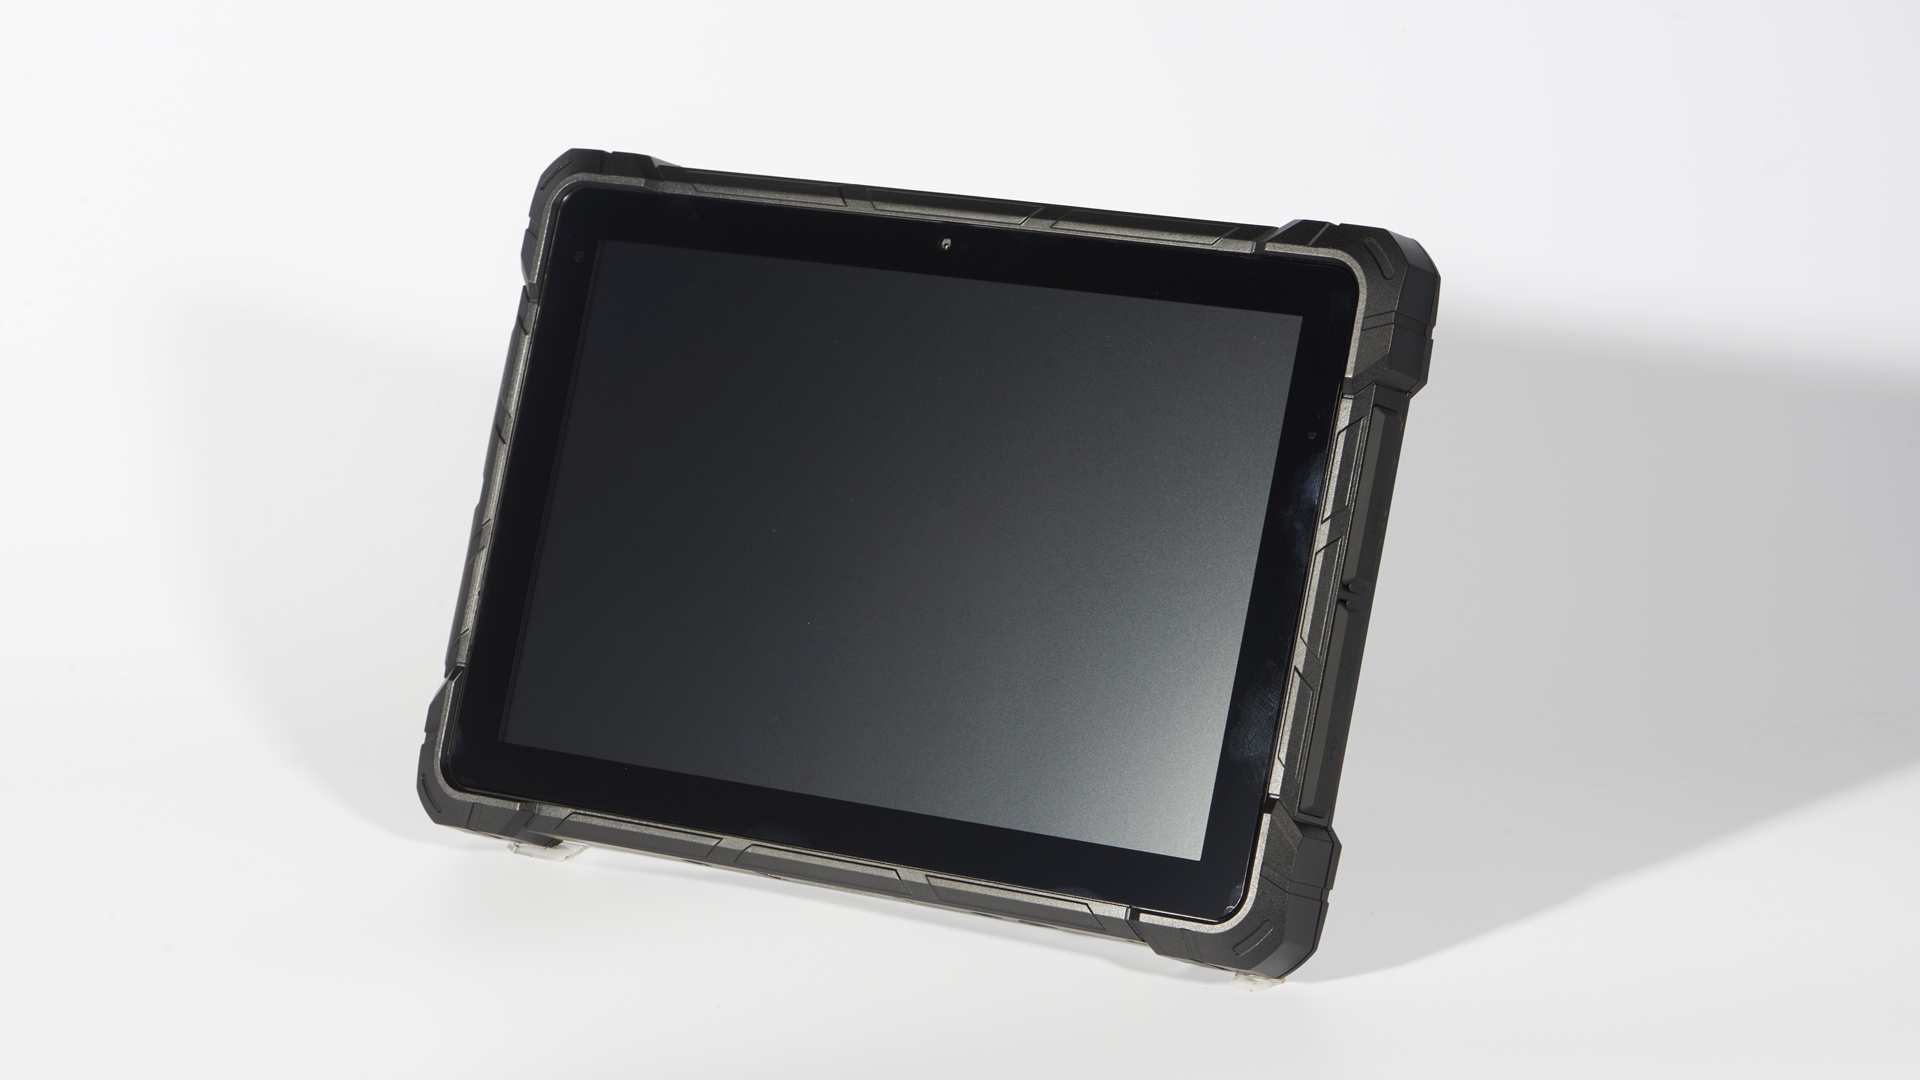 Industrial tablet computers need to be designed with wide temperature and humidity